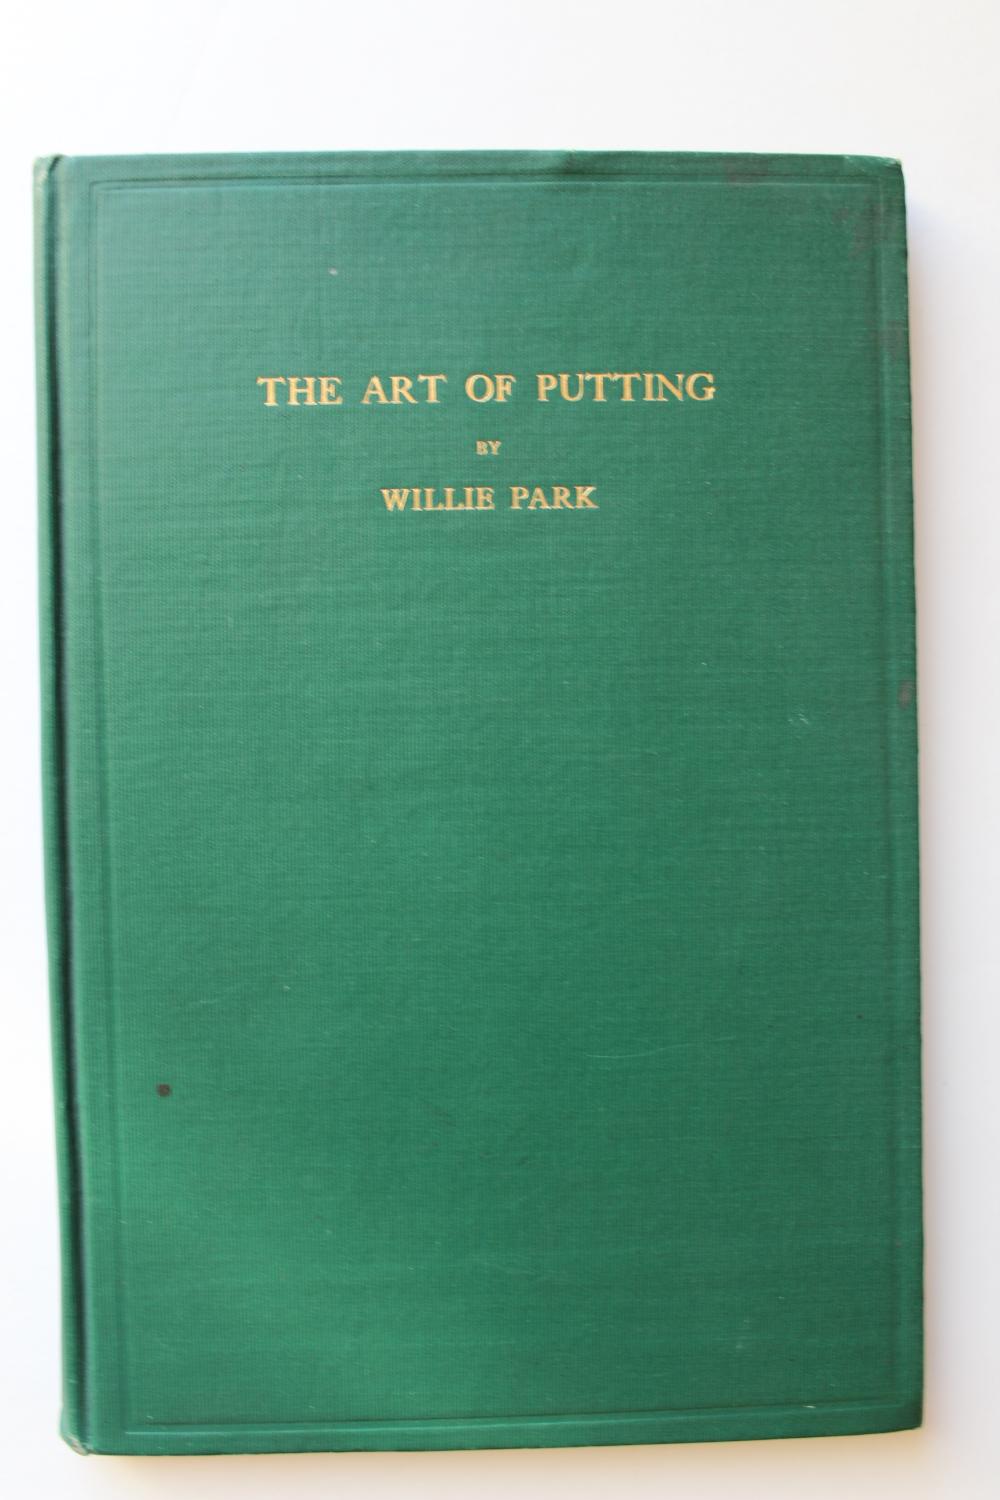 The Art of Putting by Willie Park, Jr. 1921